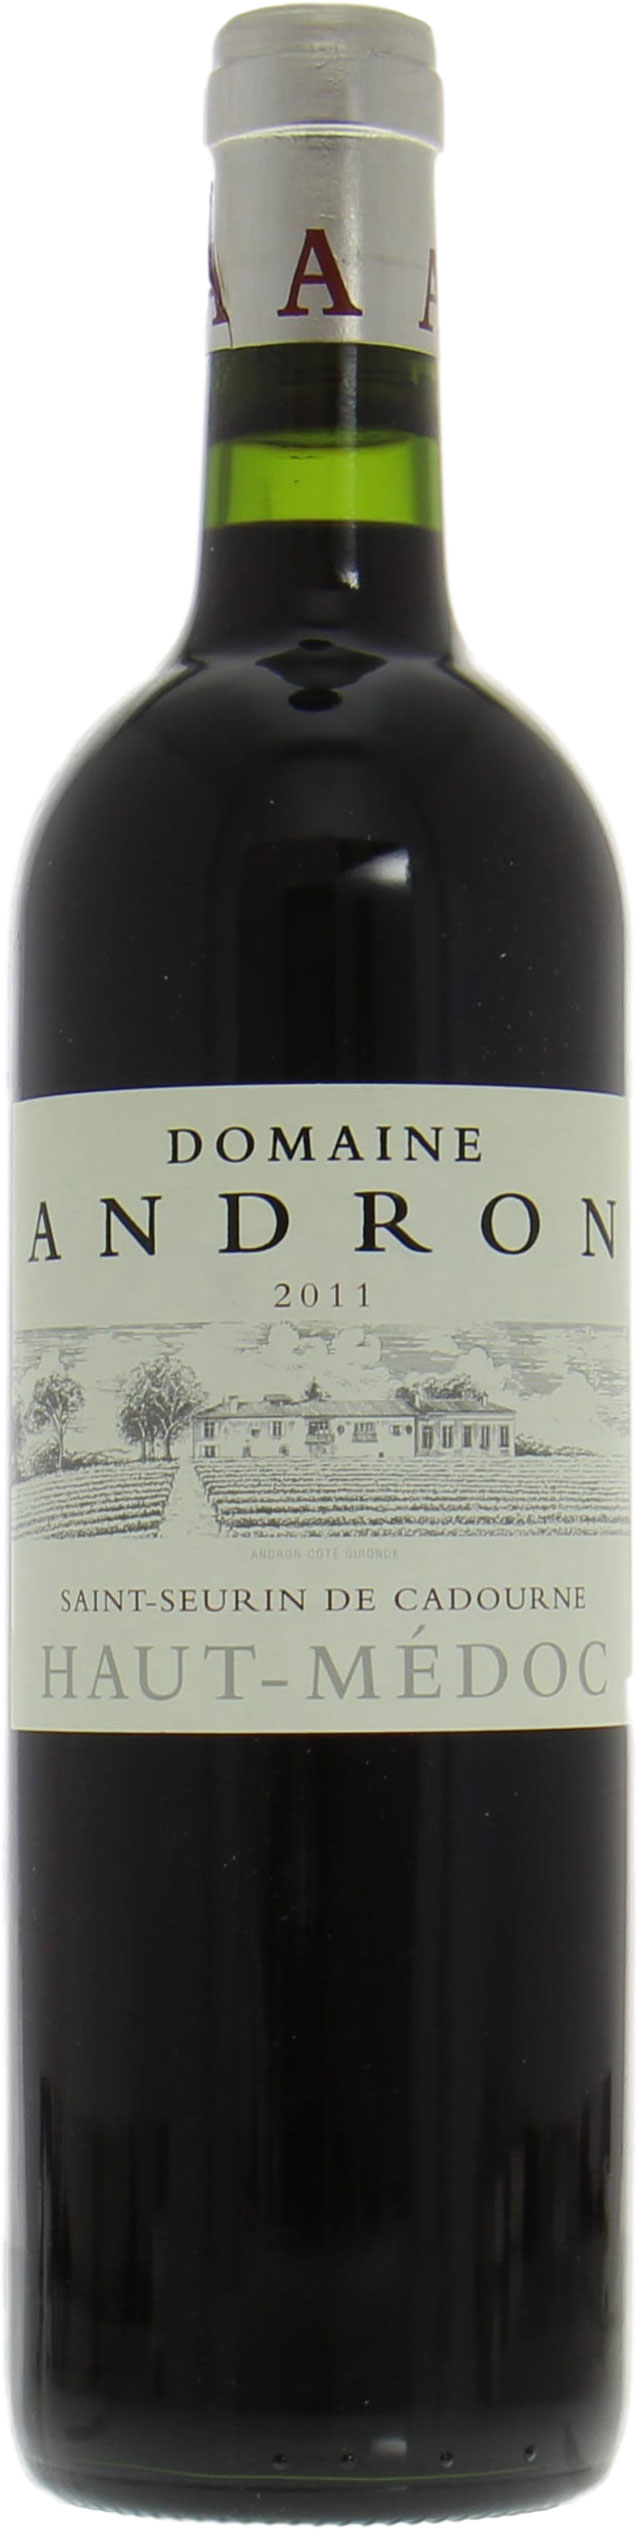 Domaine Andron - Domaine Andron 2011 From Original Wooden Case